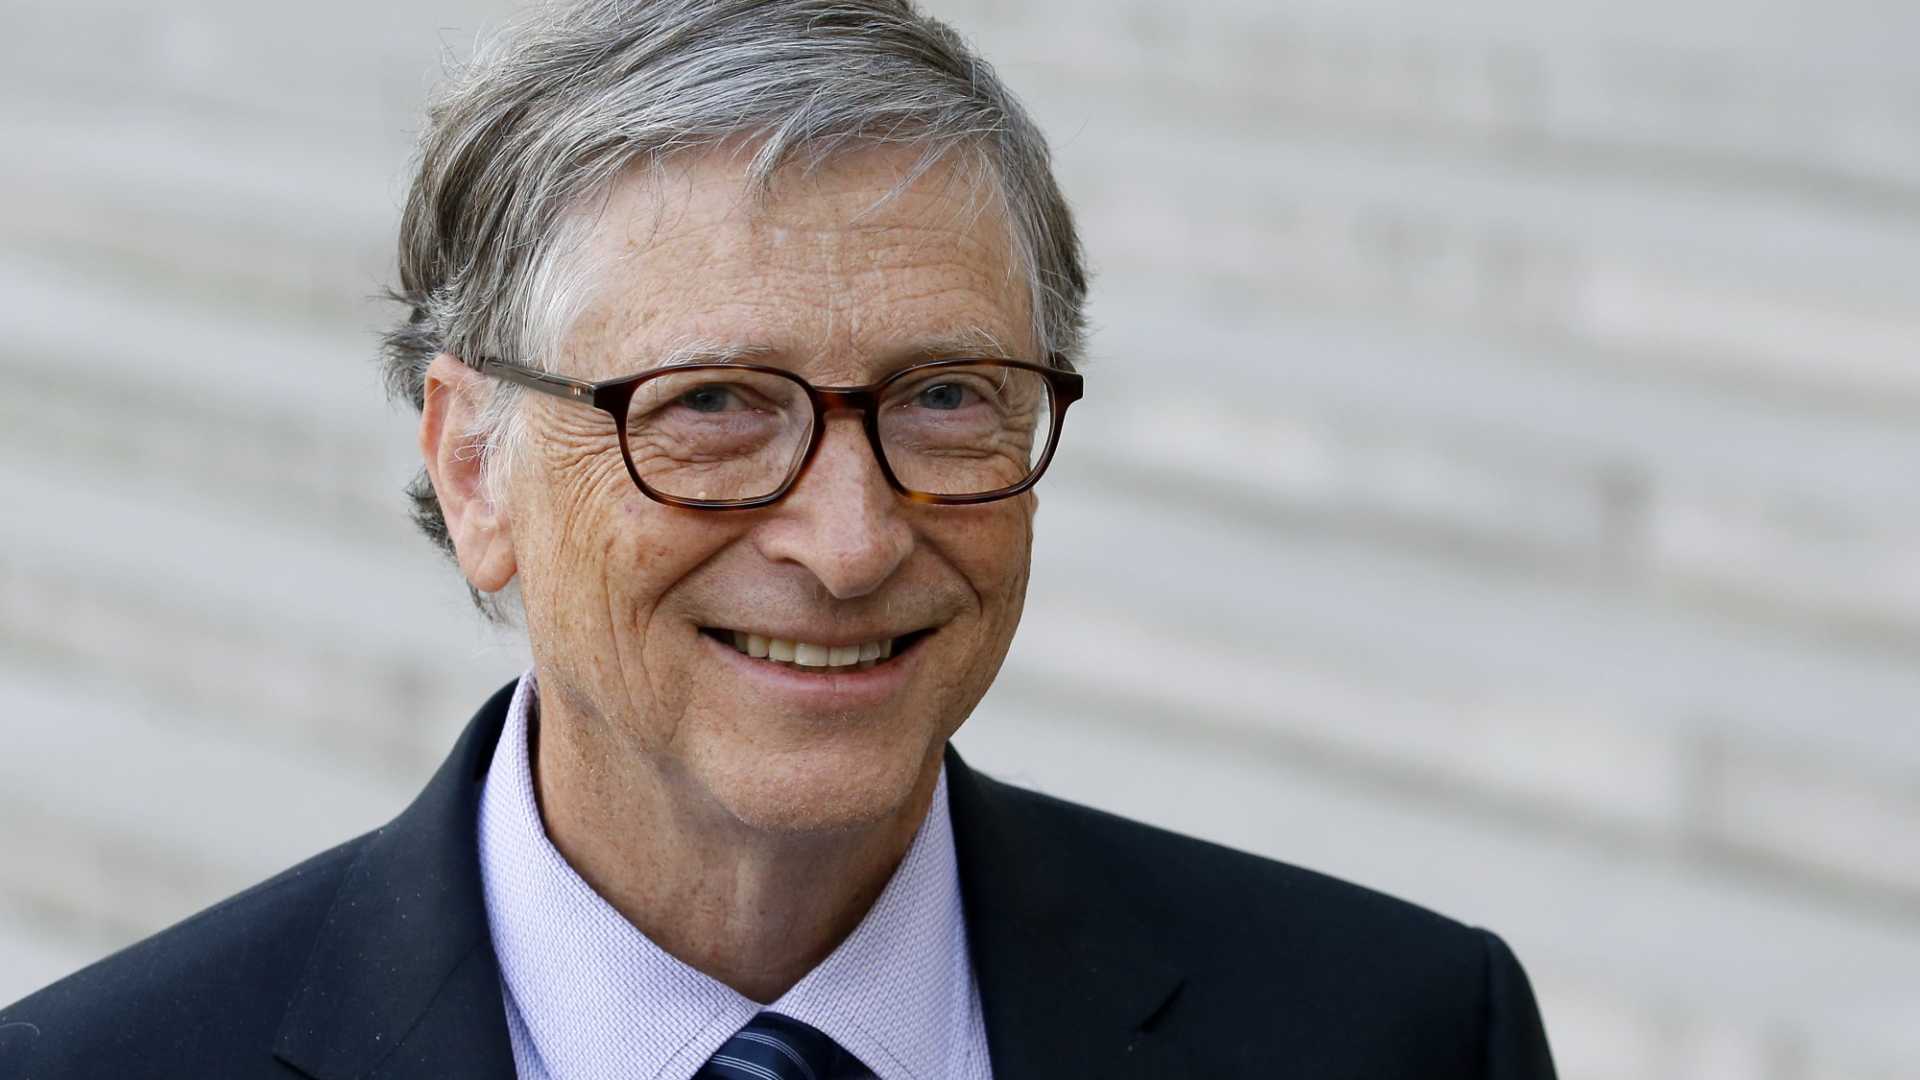 Bill Gates says people with these 3 skills will be successful in the future job market